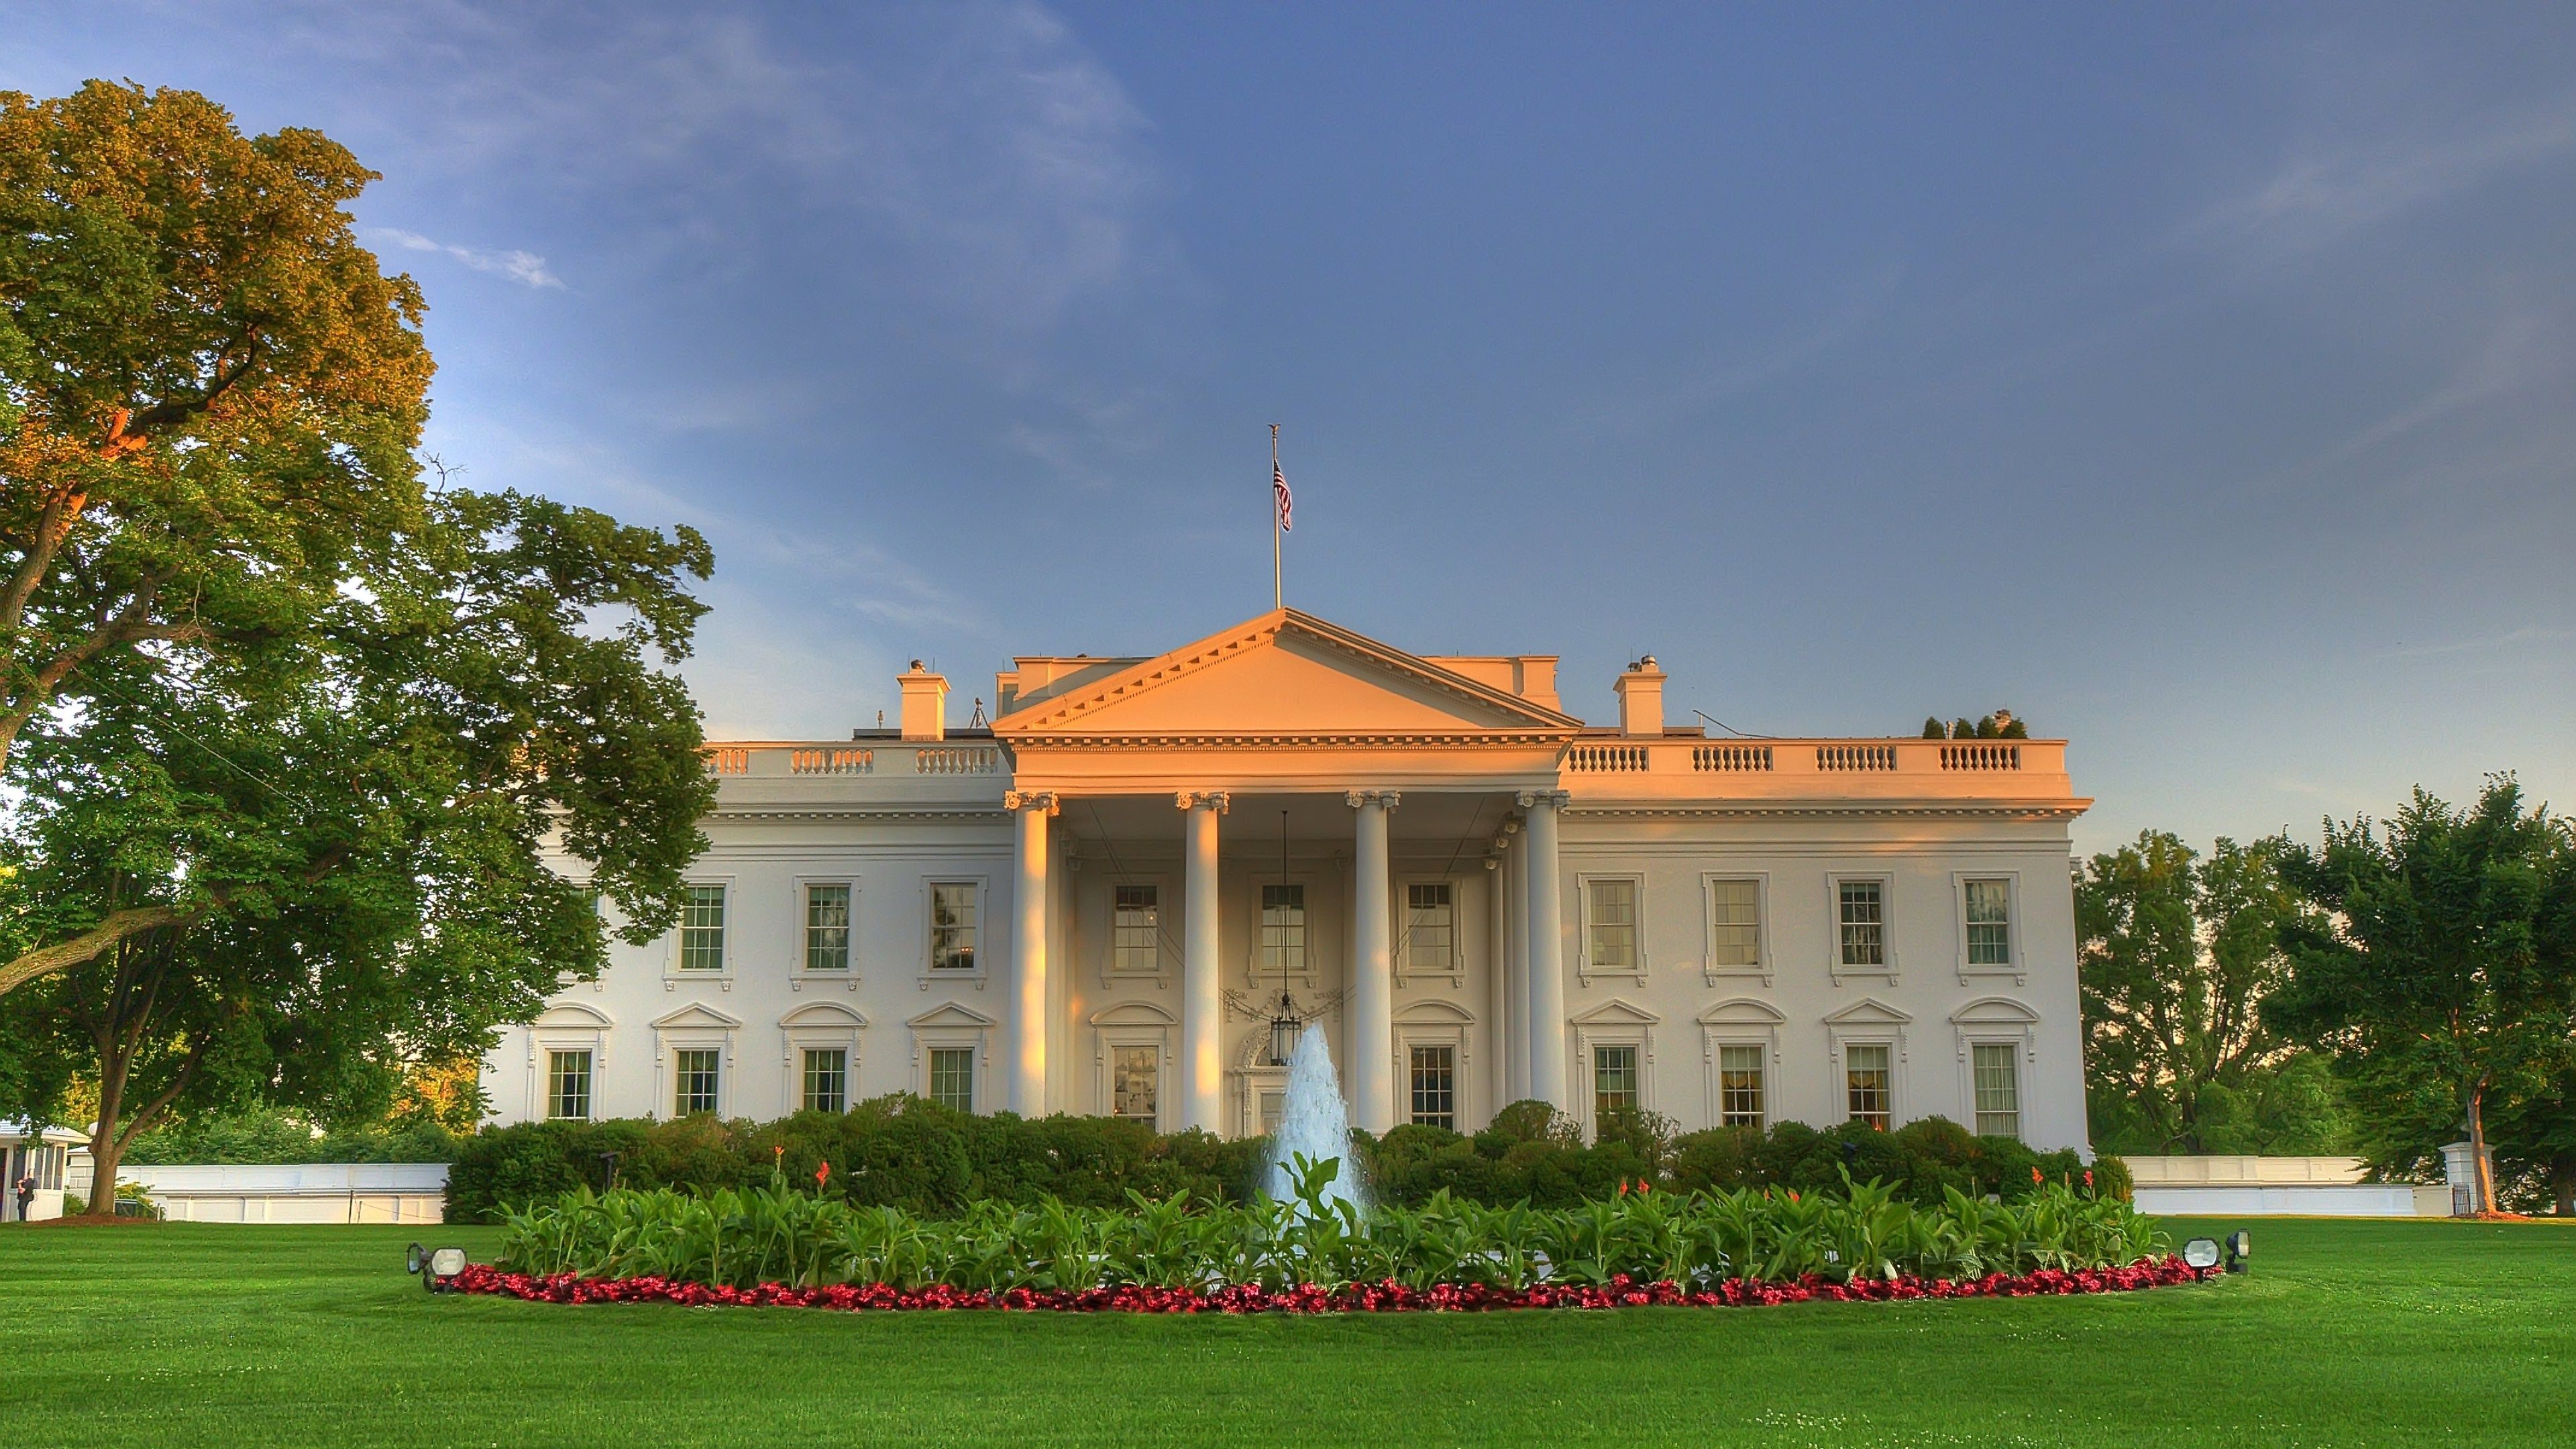 white house 4k Ultra HD Wallpaper and Background Image. House in nature, White house down, White house